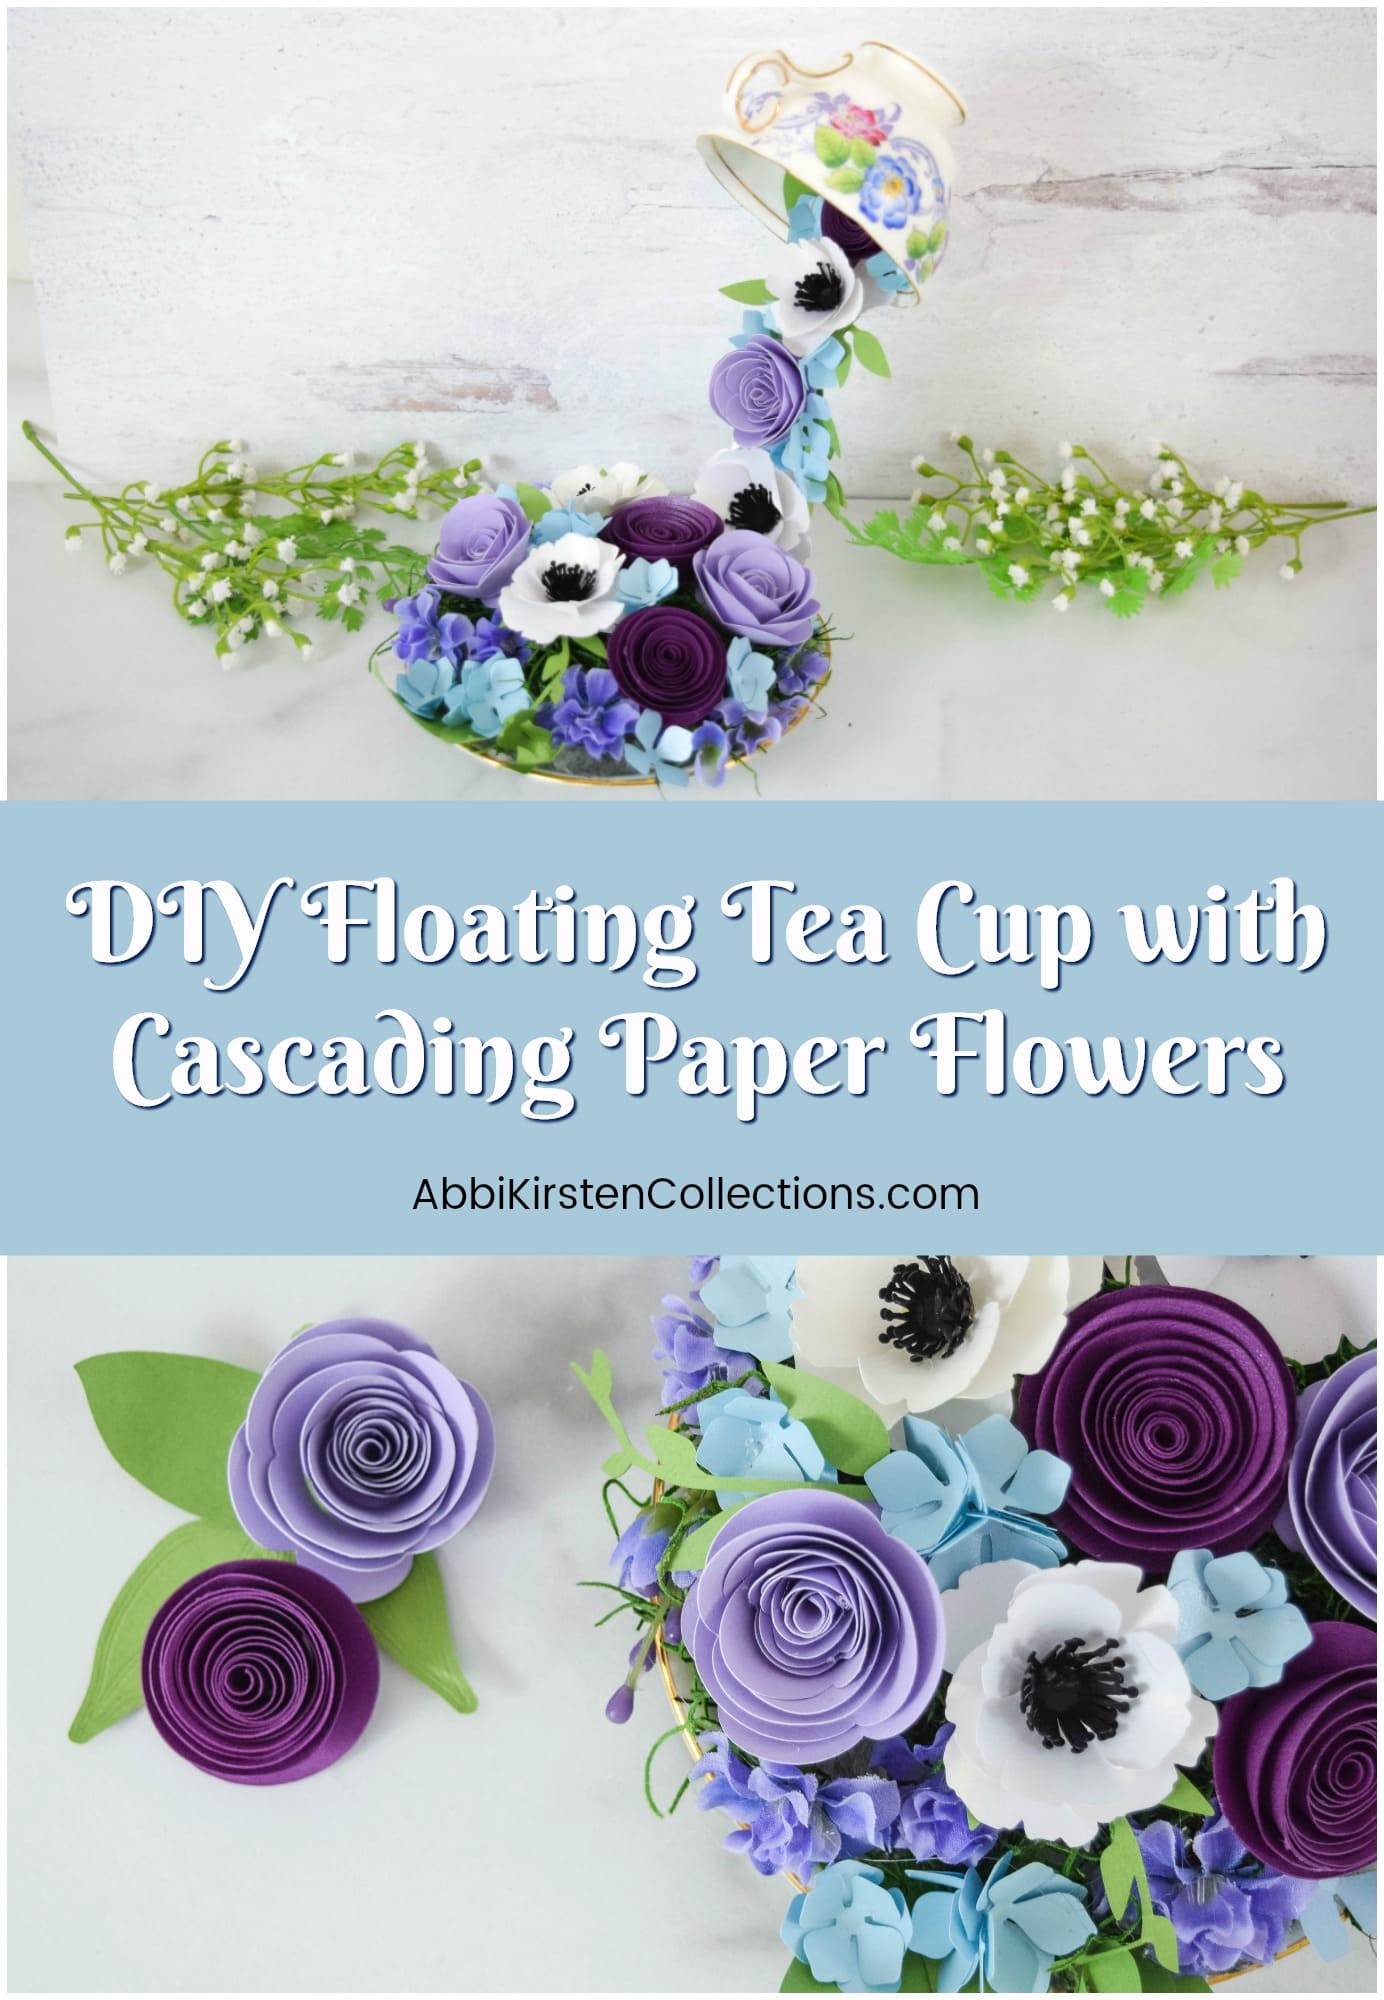 A stacked set of two images showing floating tea cups with cascading paper flowers. The paper roses are light to dark shades of purple, with smaller flowers in shades of blue sprinkled between. In the top image, a white tea cup floats, pouring out of row of purple and white paper flowers. Text in the center of the image reads "DIY floating tea cups with cascading paper flowers - abbikirstencollections.com"